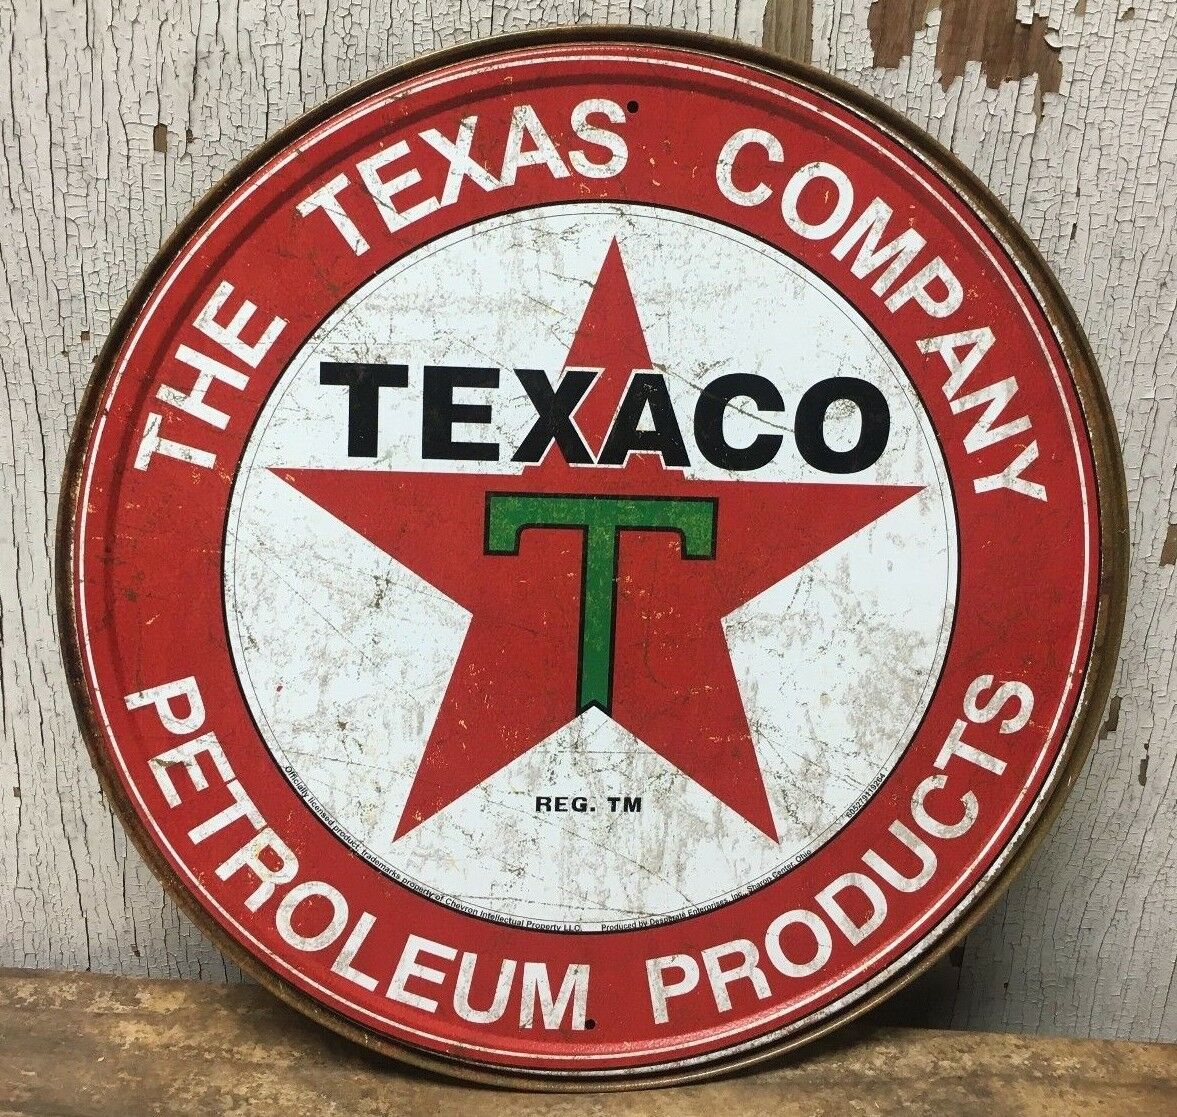 Texaco Petroleum Products Texas Company 12" Round Metal Wall Sign